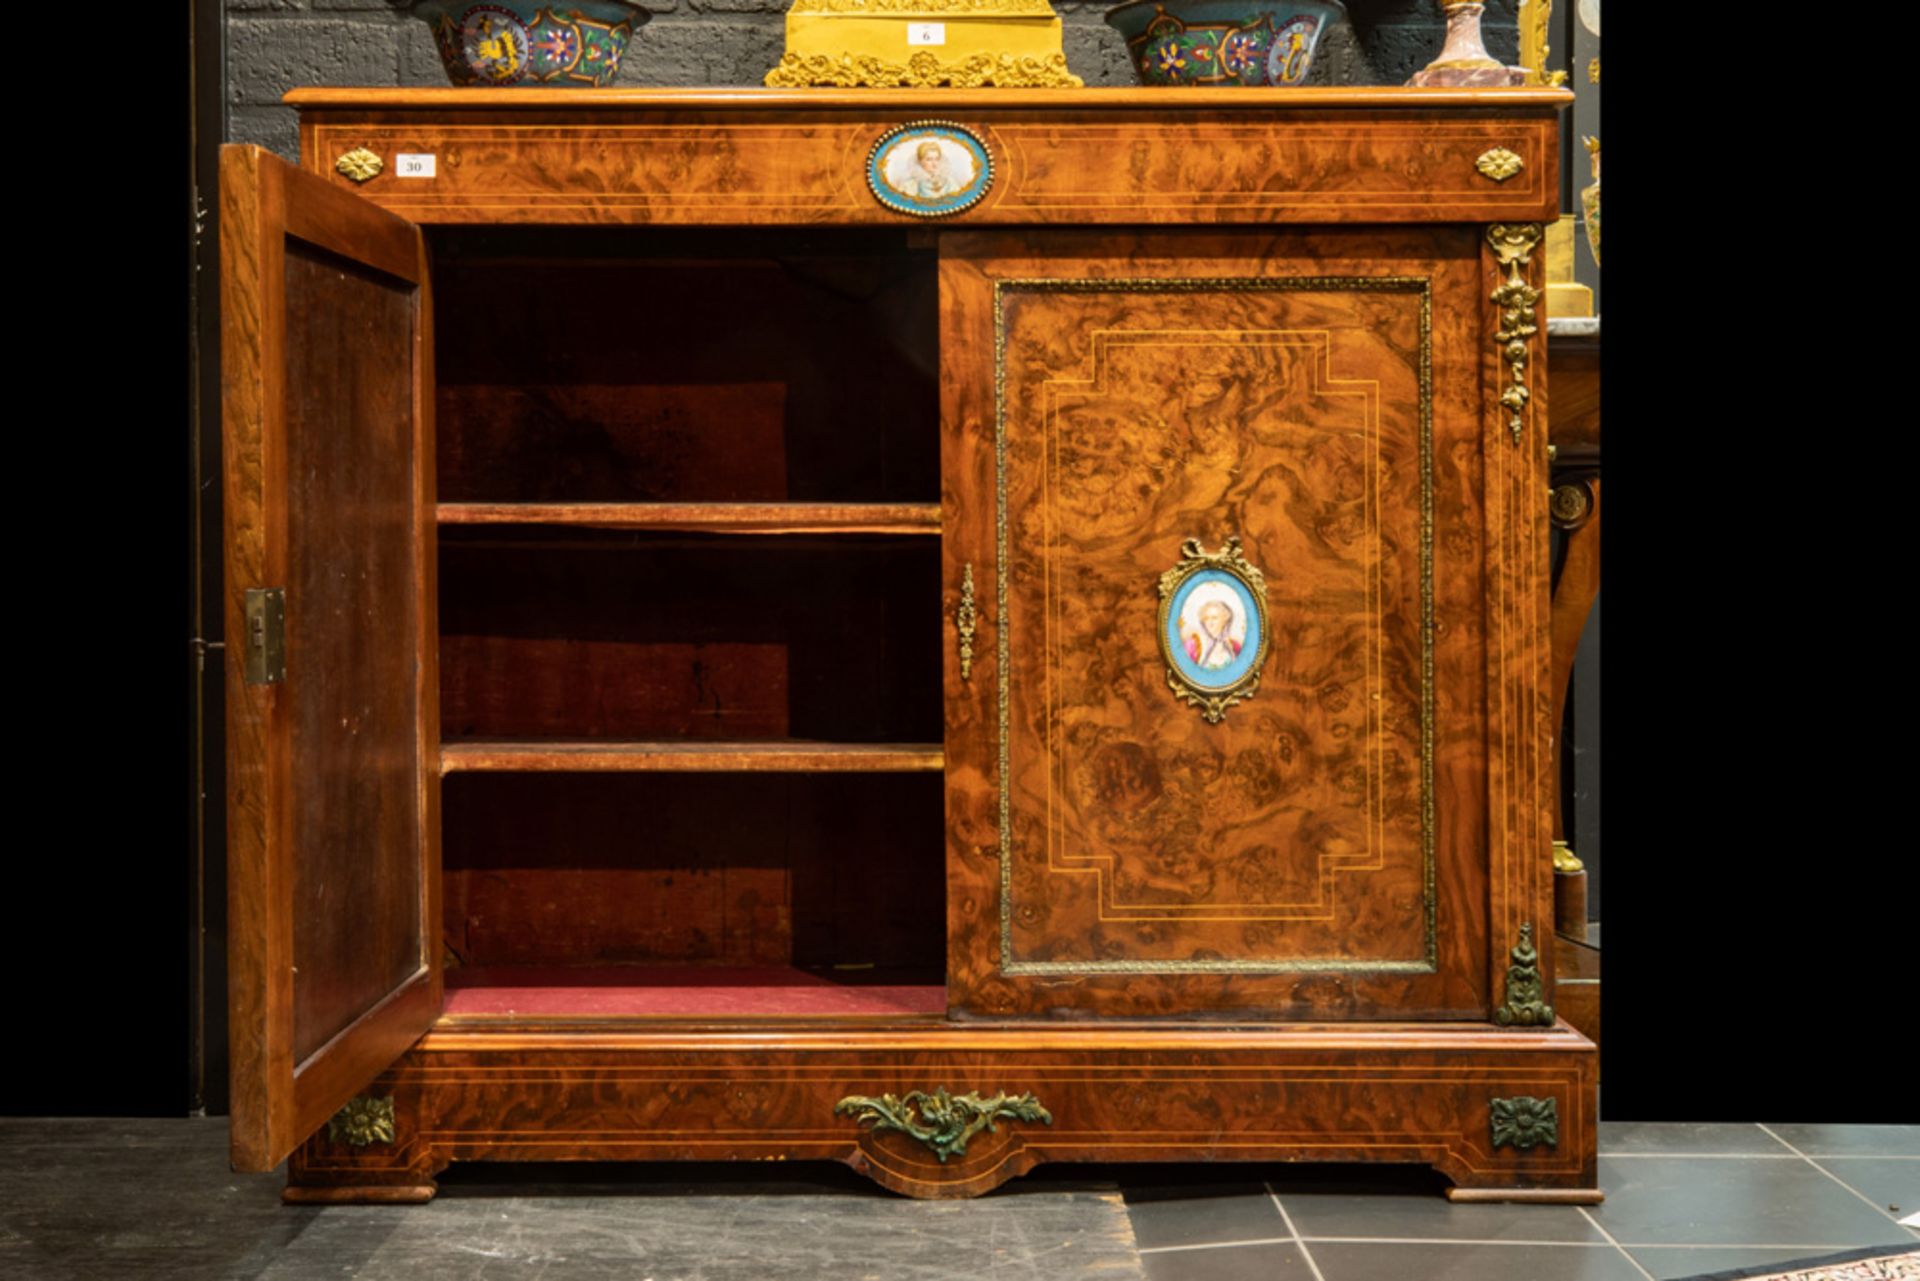 mid 19th Cent. European neoclassical cabinet in burr of walnut with mountings in guilded bronze - Bild 2 aus 4